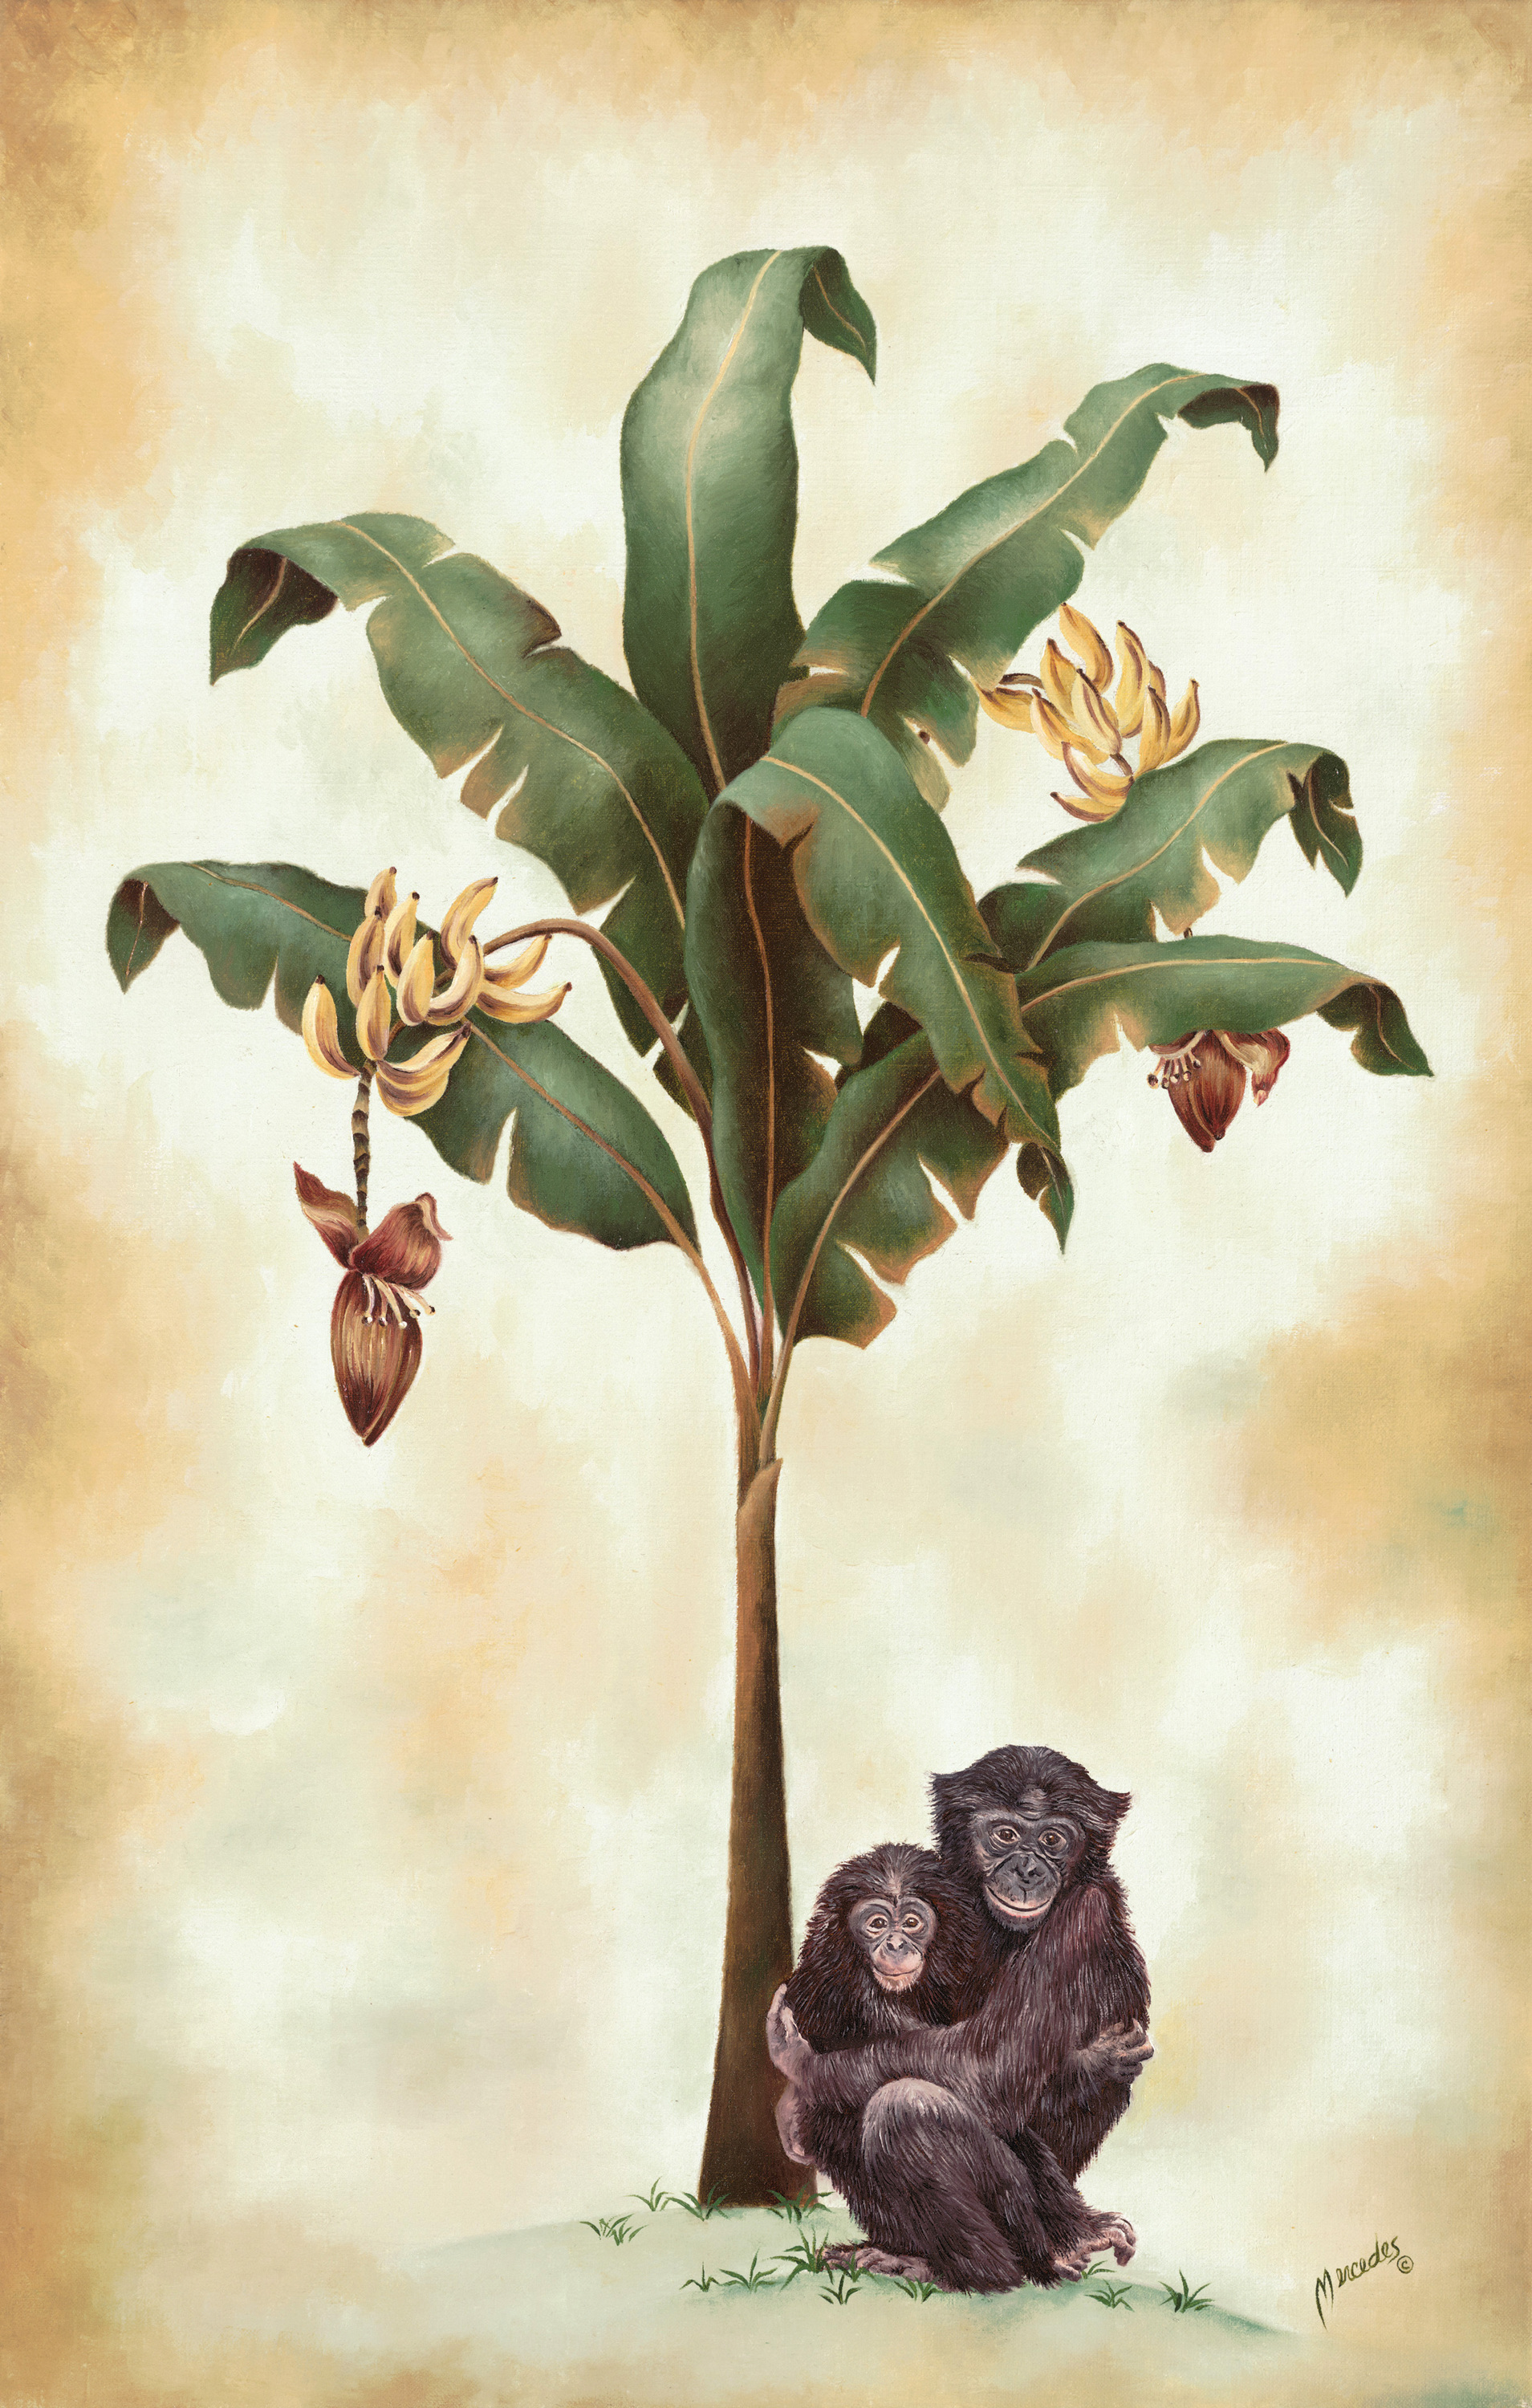 Monkeys and bananas   image only changed to rgb nhtyfi